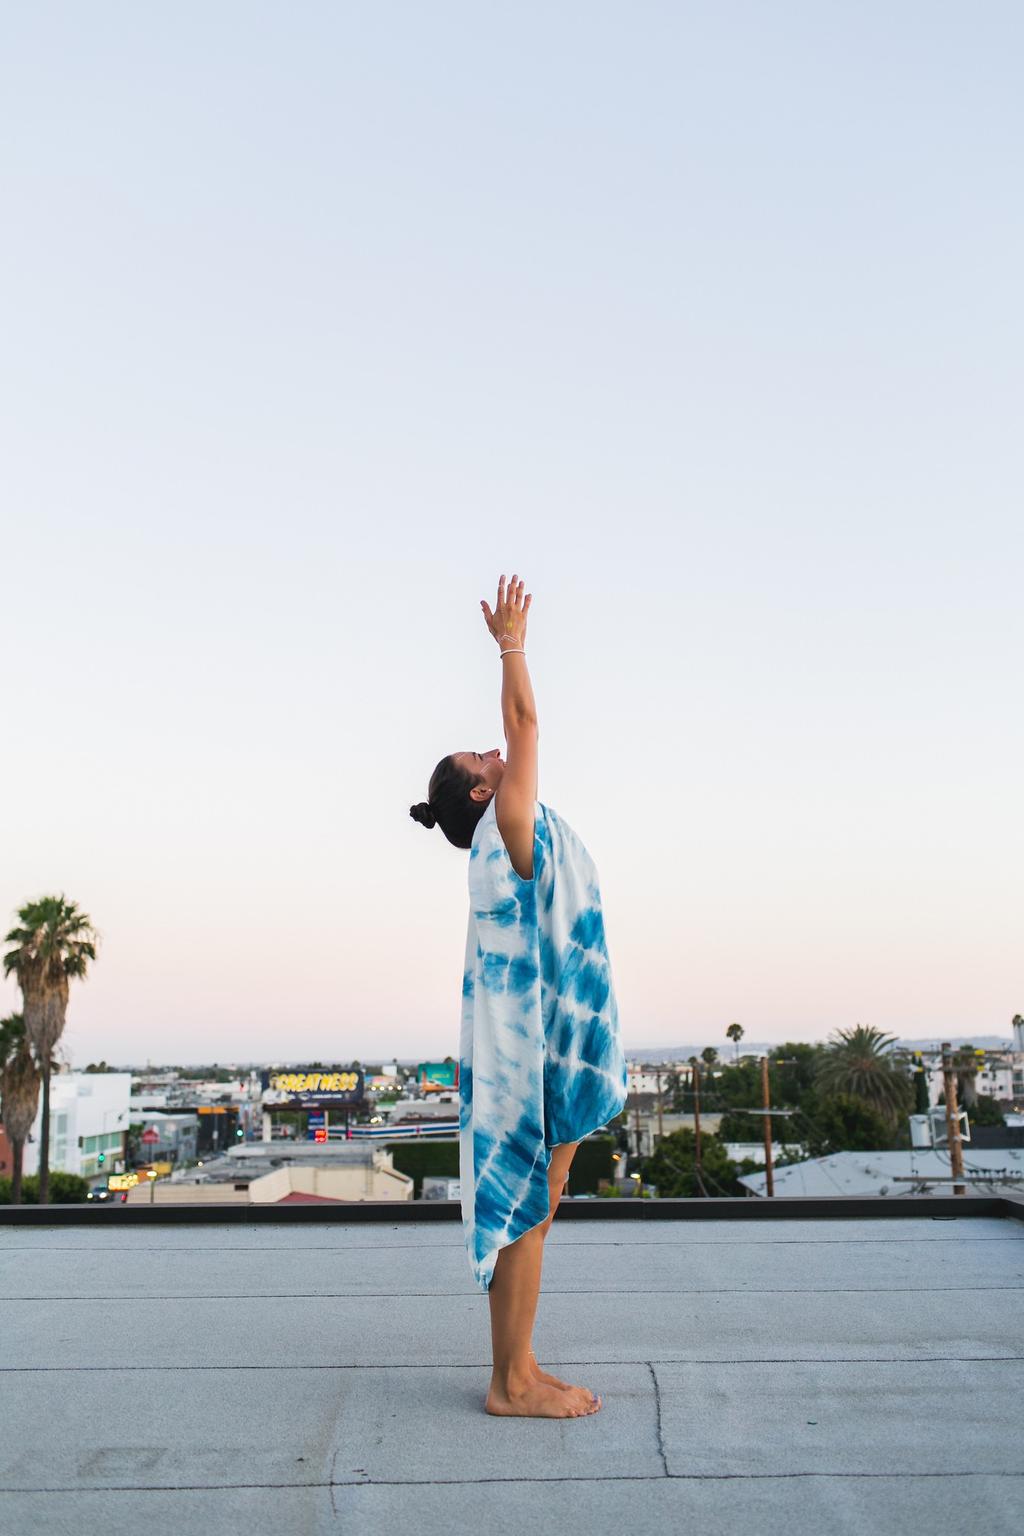 ABOUT US: Wanderlust is the world s pre-eminent yoga lifestyle brand with 40+ large-scale events around the world, multiple brick-and-mortar centers and a media network.